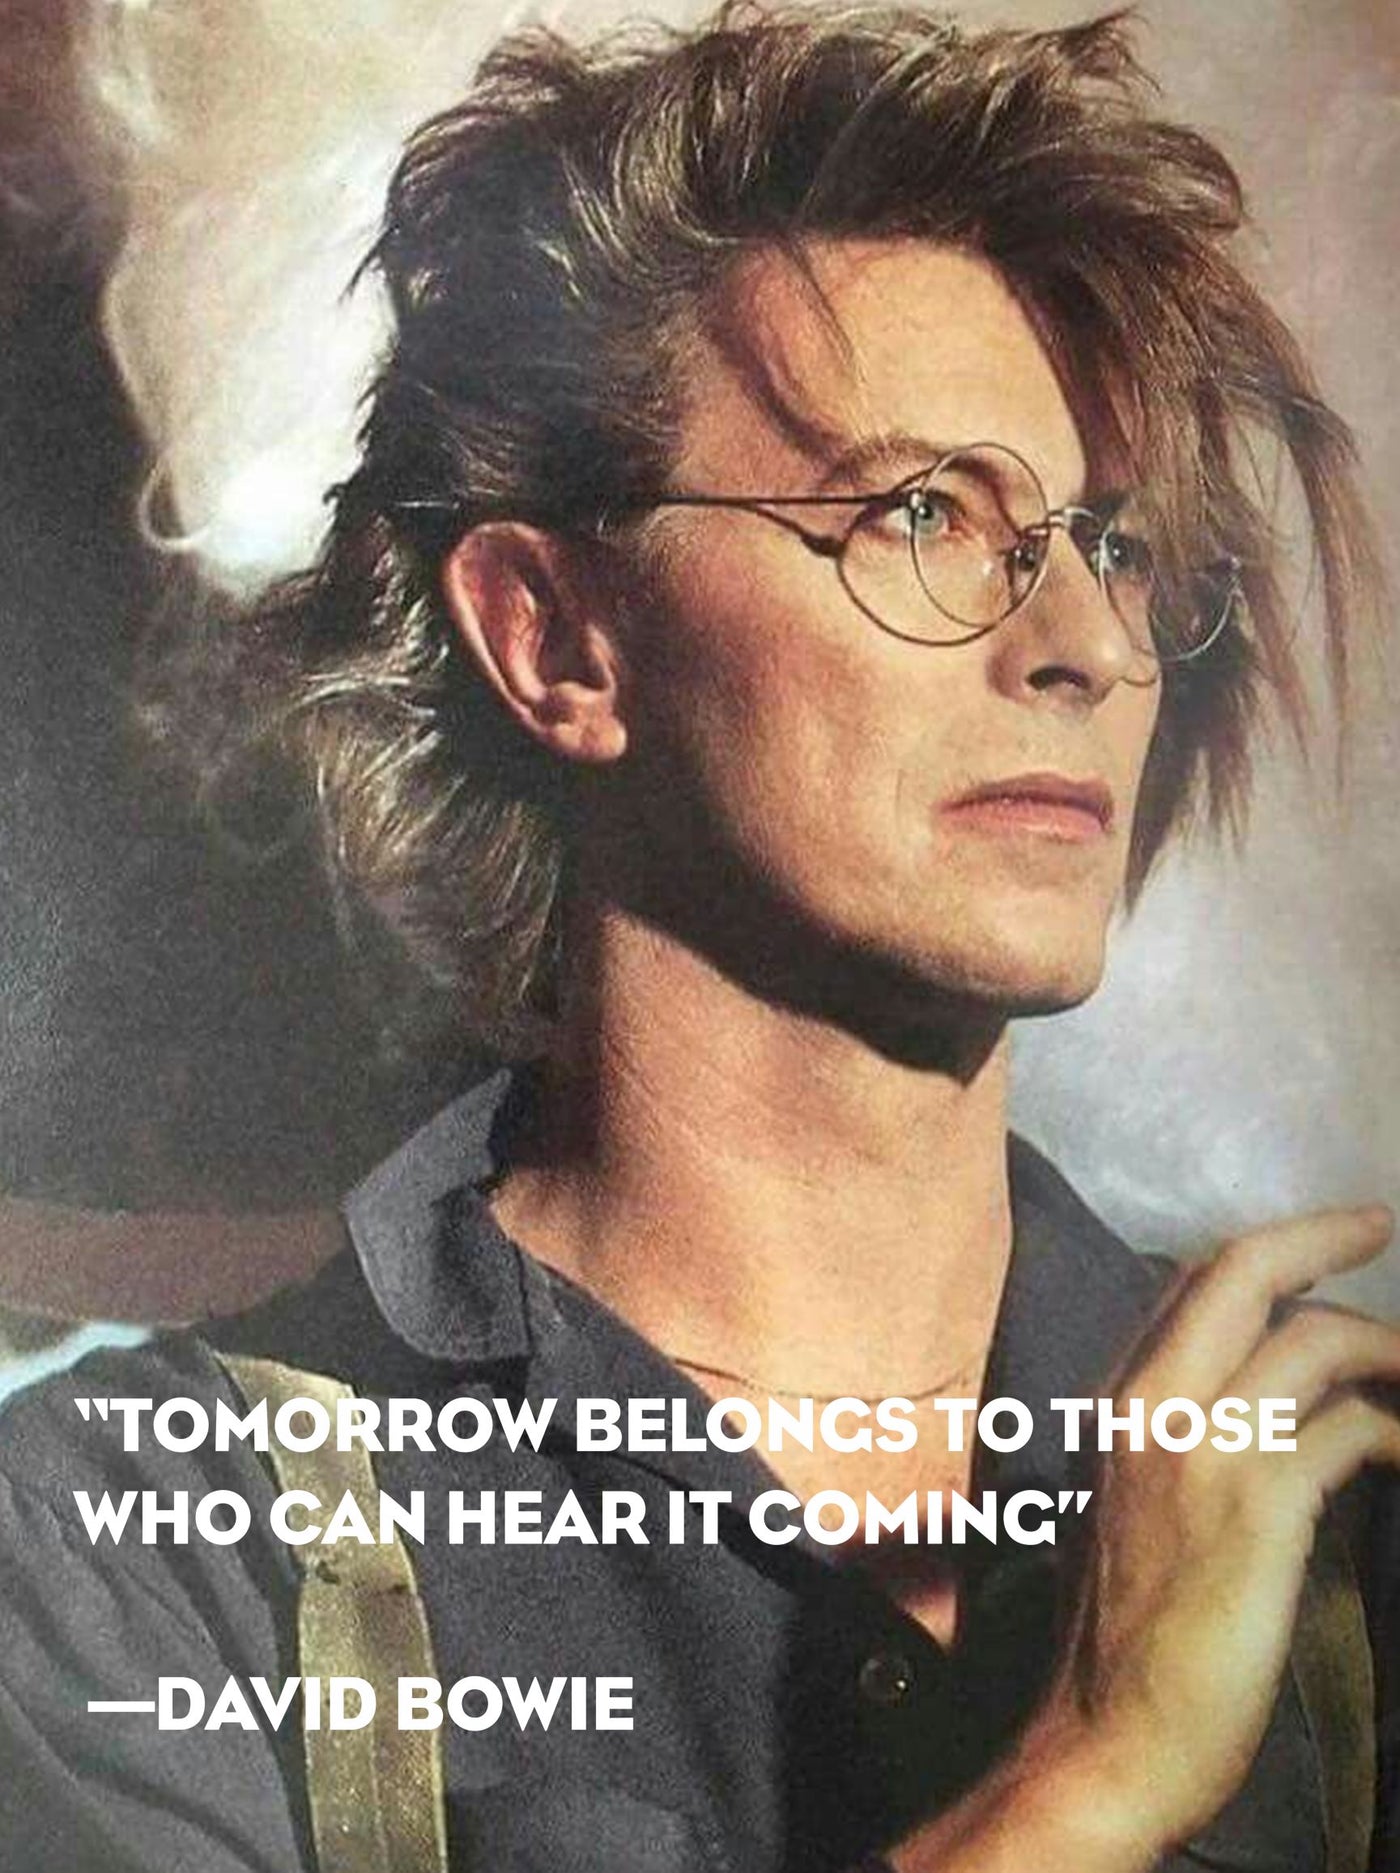 BOWIE QUOTES "Tomorrow belongs to those who can hear it coming"